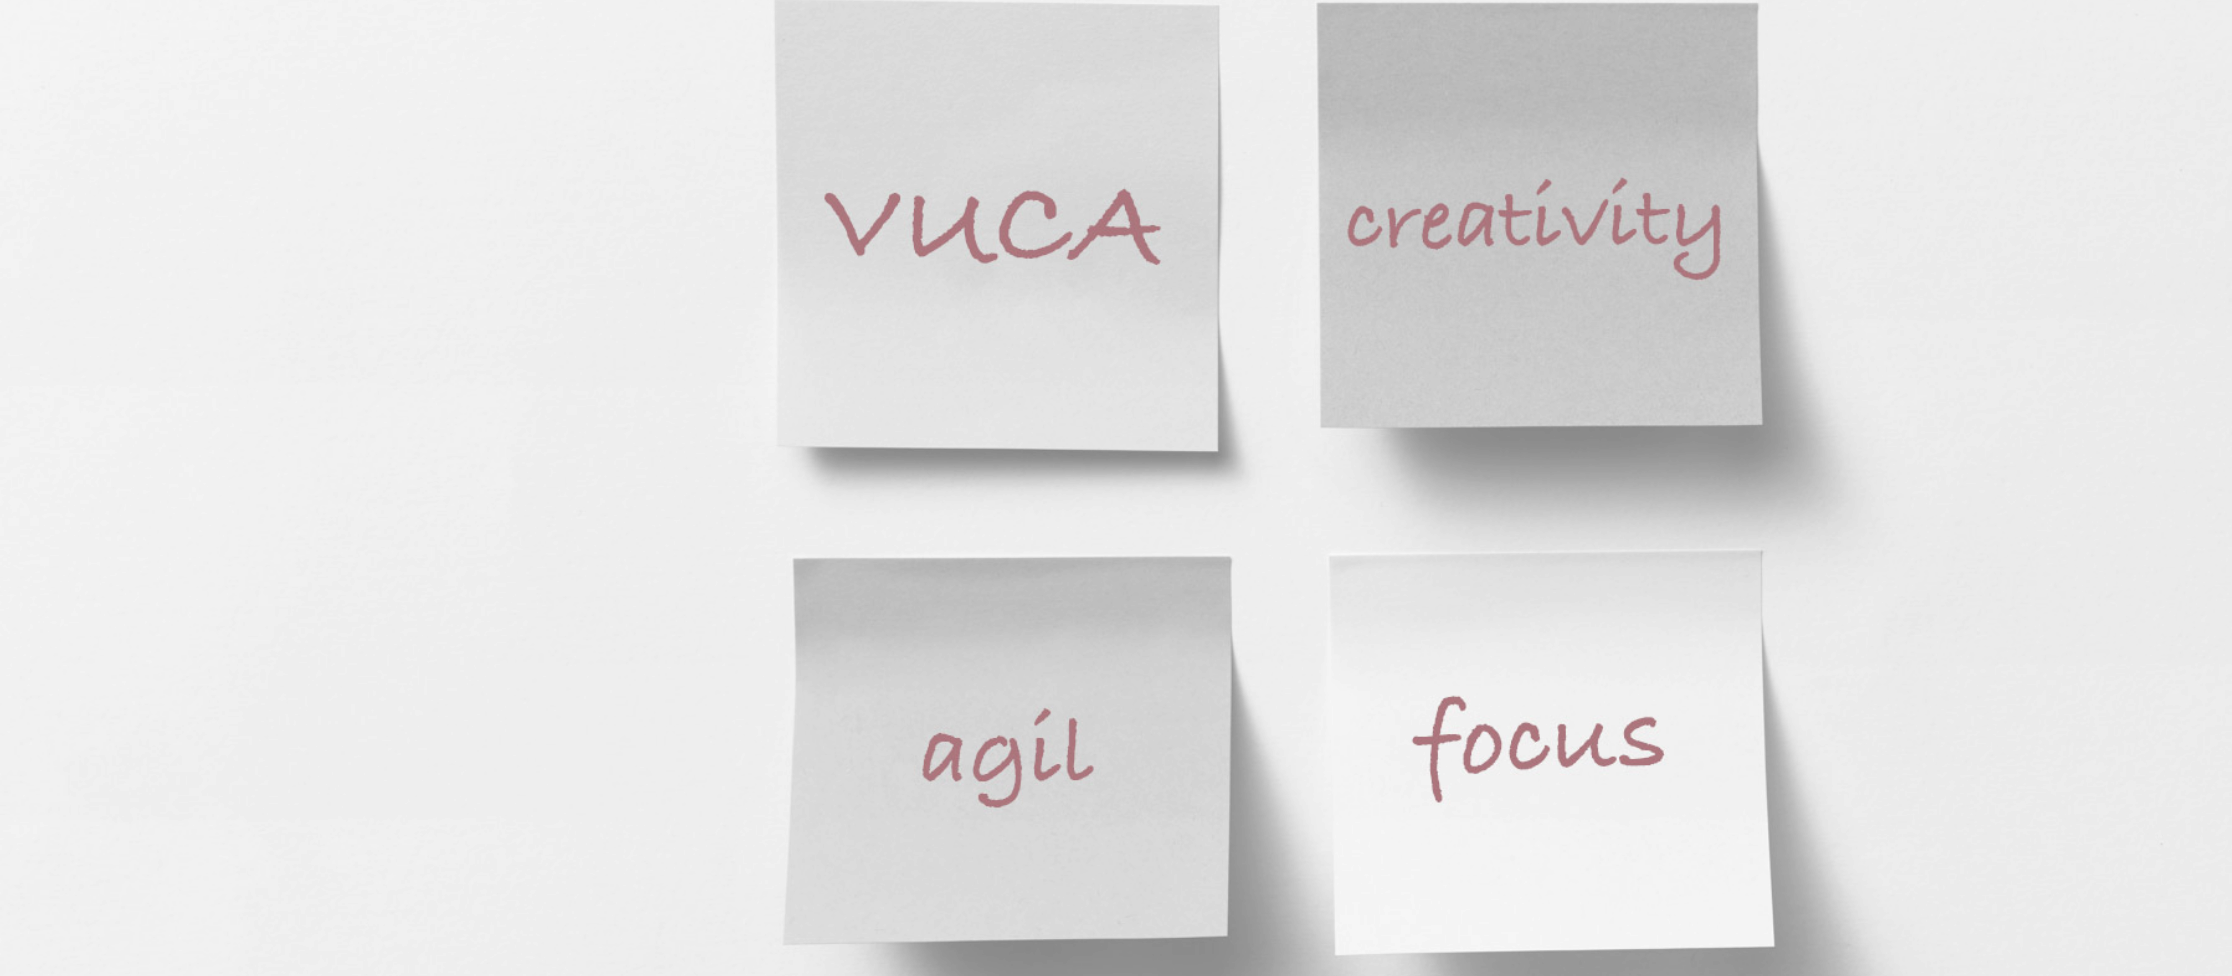 agil, creativity and focus on strategy coaching